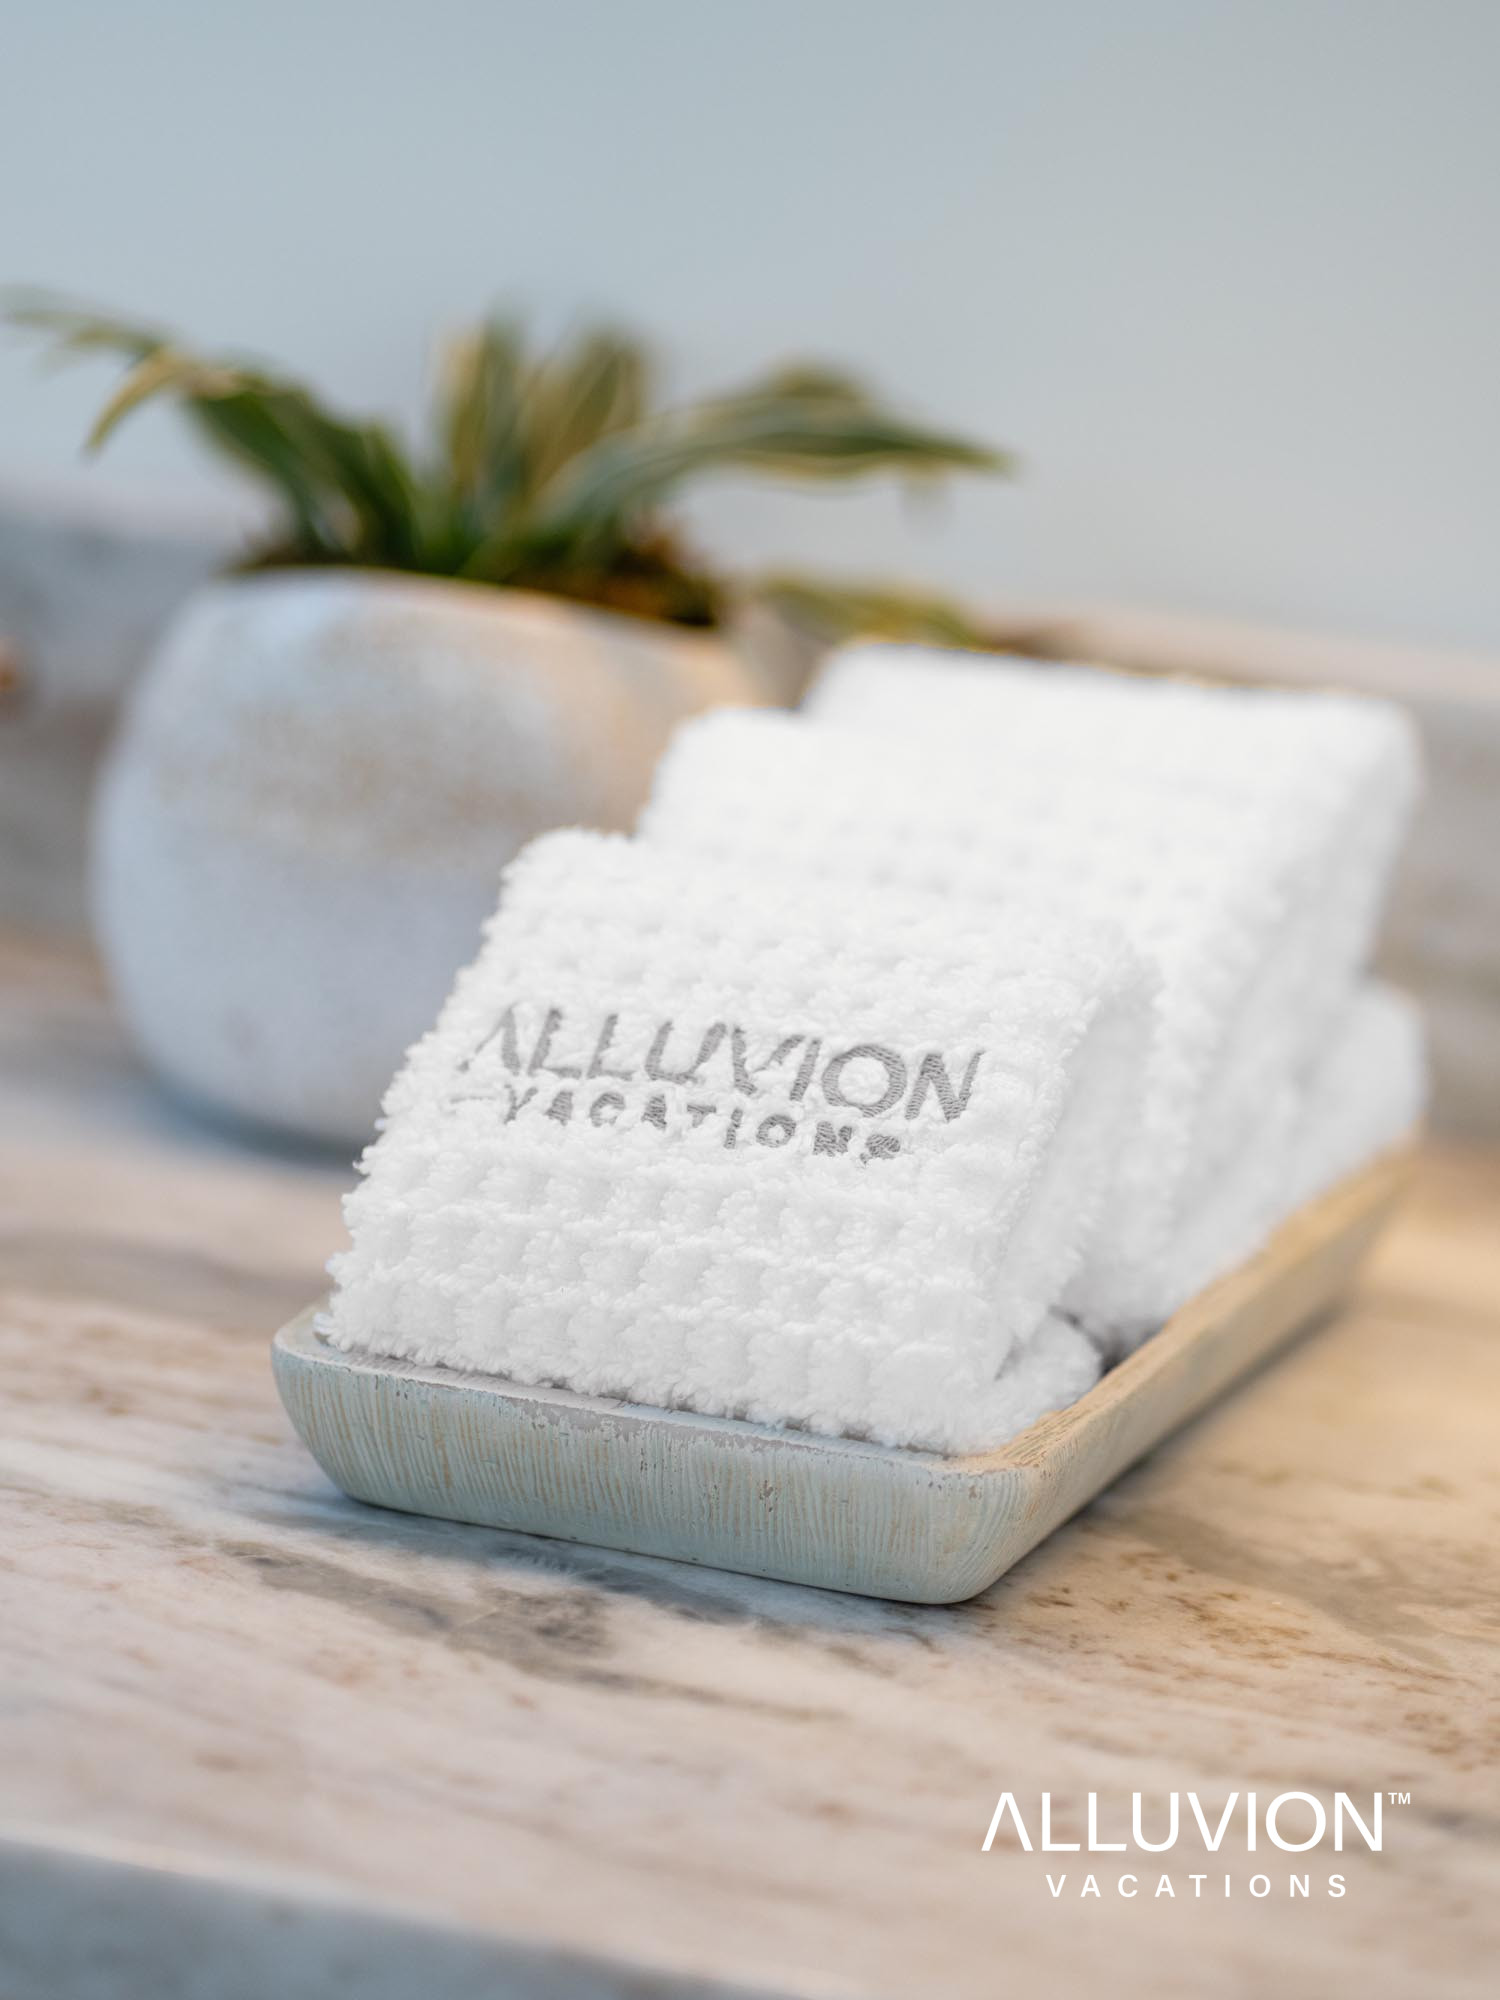 Discover the Ultimate Comfort of Experiential Hospitality with Alluvion Vacations' Signature Linen Service and Soft Waffle Towels!